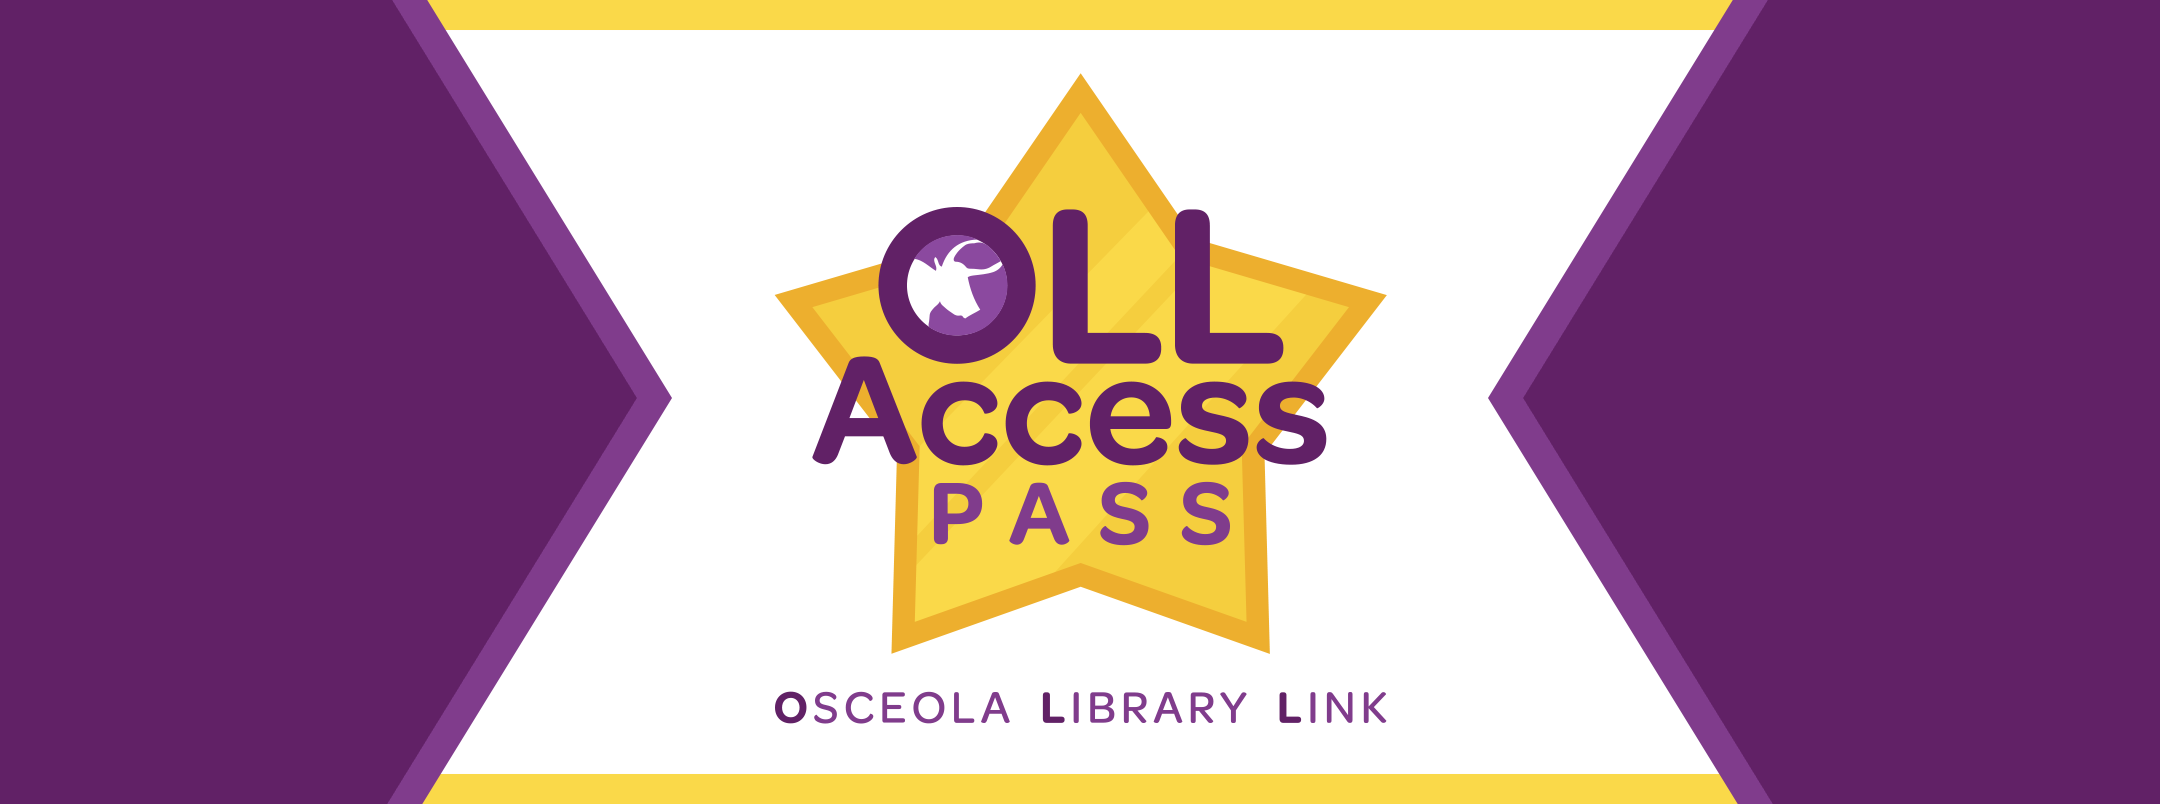 A banner with the OLL Access Pass logo